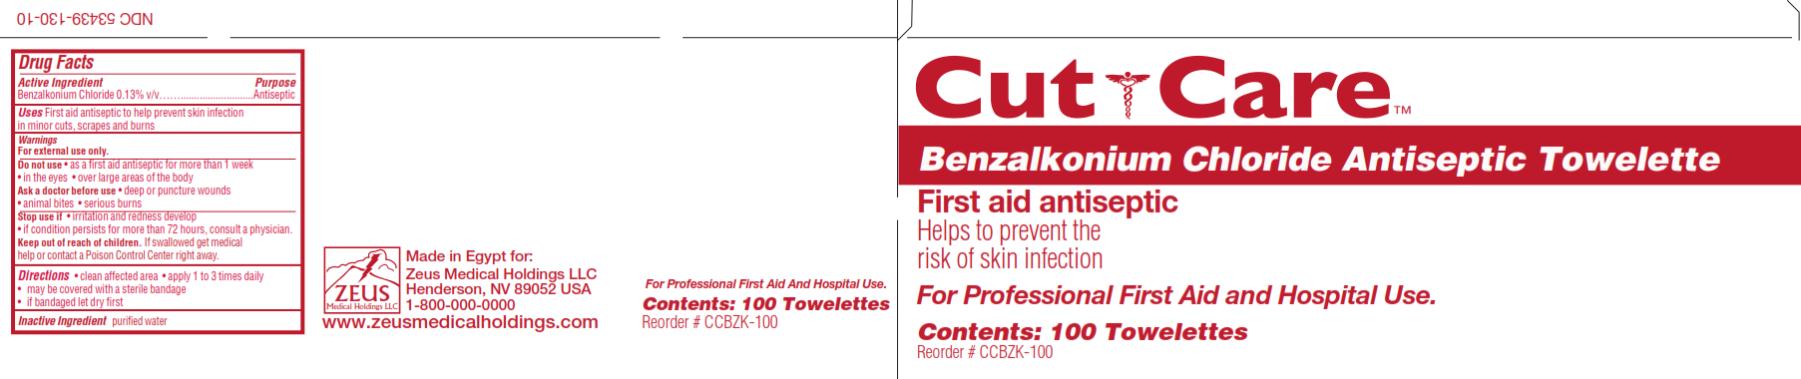 PRINCIPAL DISPLAY PANEL
NDC: <a href=/NDC/53439-130-10>53439-130-10</a>
Cut Care
Benzalkonium Chloride Antiseptic Towelette
First aid antiseptic
Contents: 100 Towelettes
